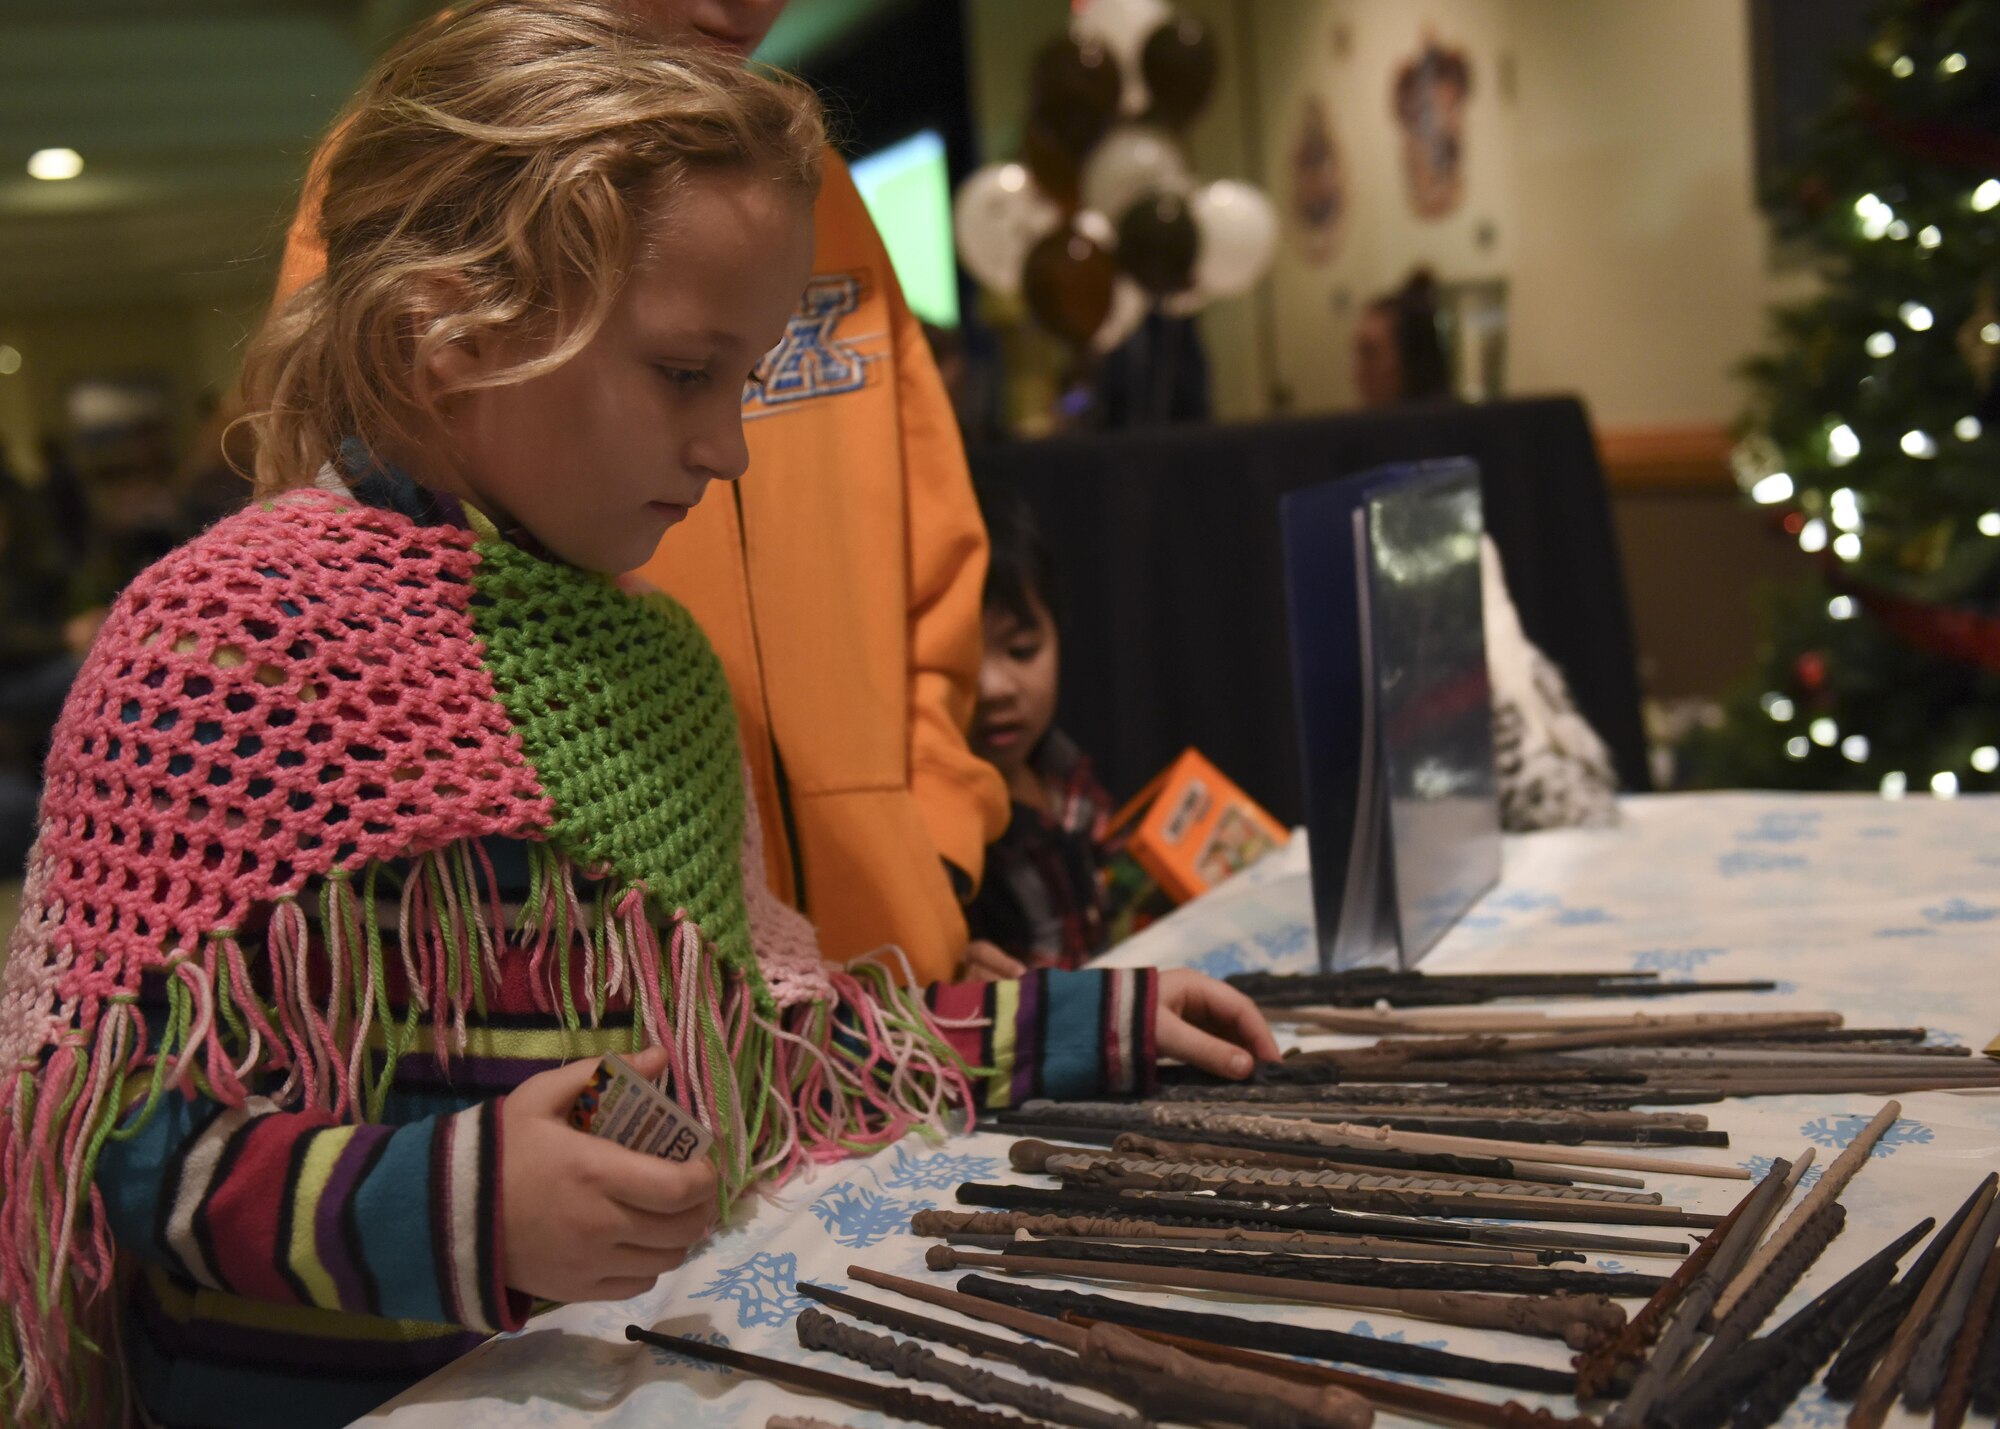 A young Team Whiteman member chooses a handmade wand during the annual tree lighting event at Whiteman Air Force Base, Mo., Nov. 29, 2016. More than 300 wands were made by volunteers to help make the wizard-themed event special.